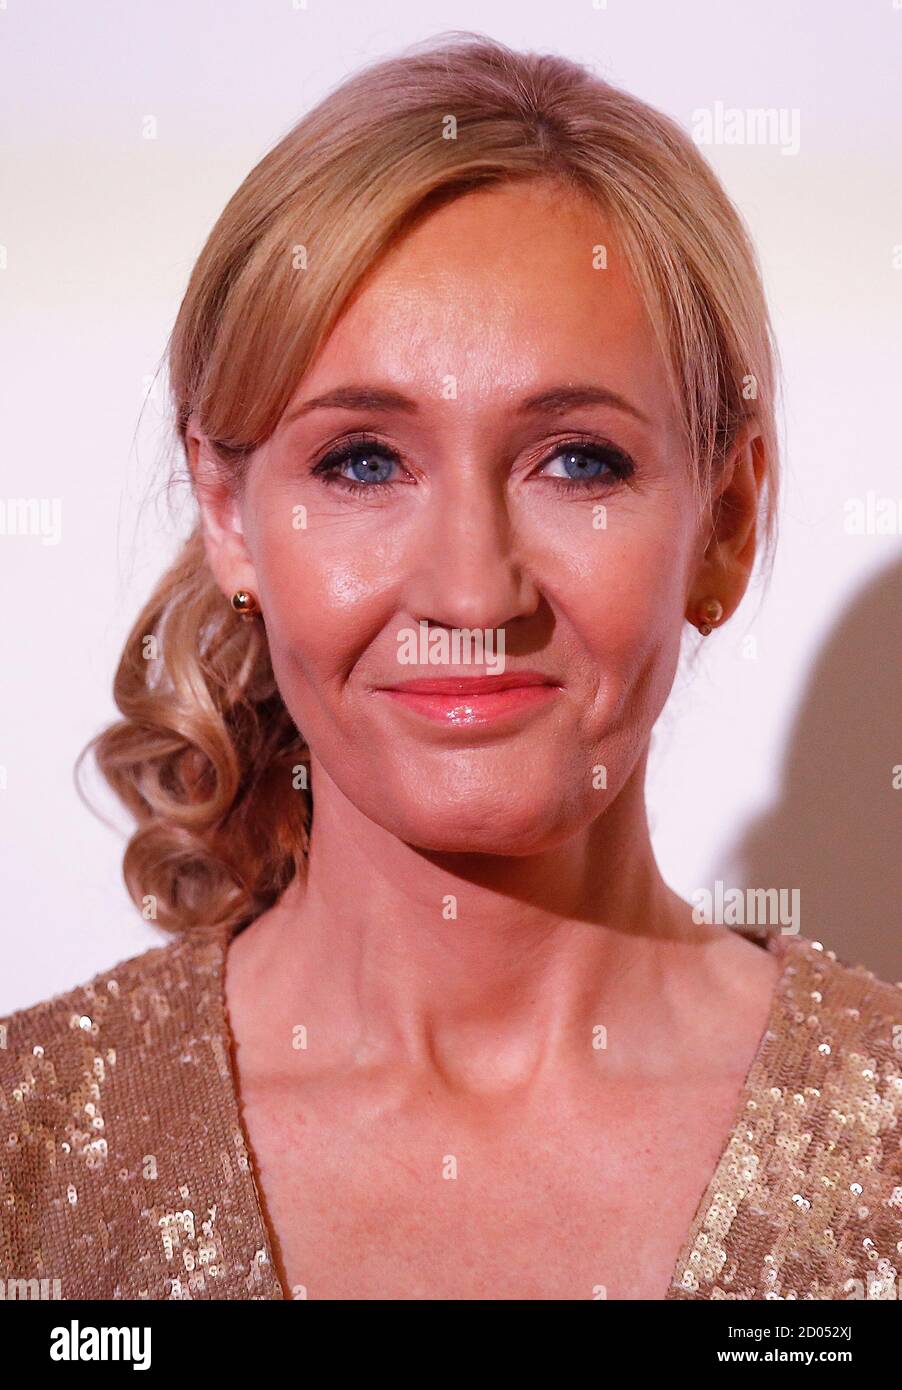 Author J.K. Rowling hosts a special family fundraising evening in aid of  her children's charity, Lumos, at the "Warner Bros. Studio - The Making of  Harry Potter in Hertfordfshire" in London November